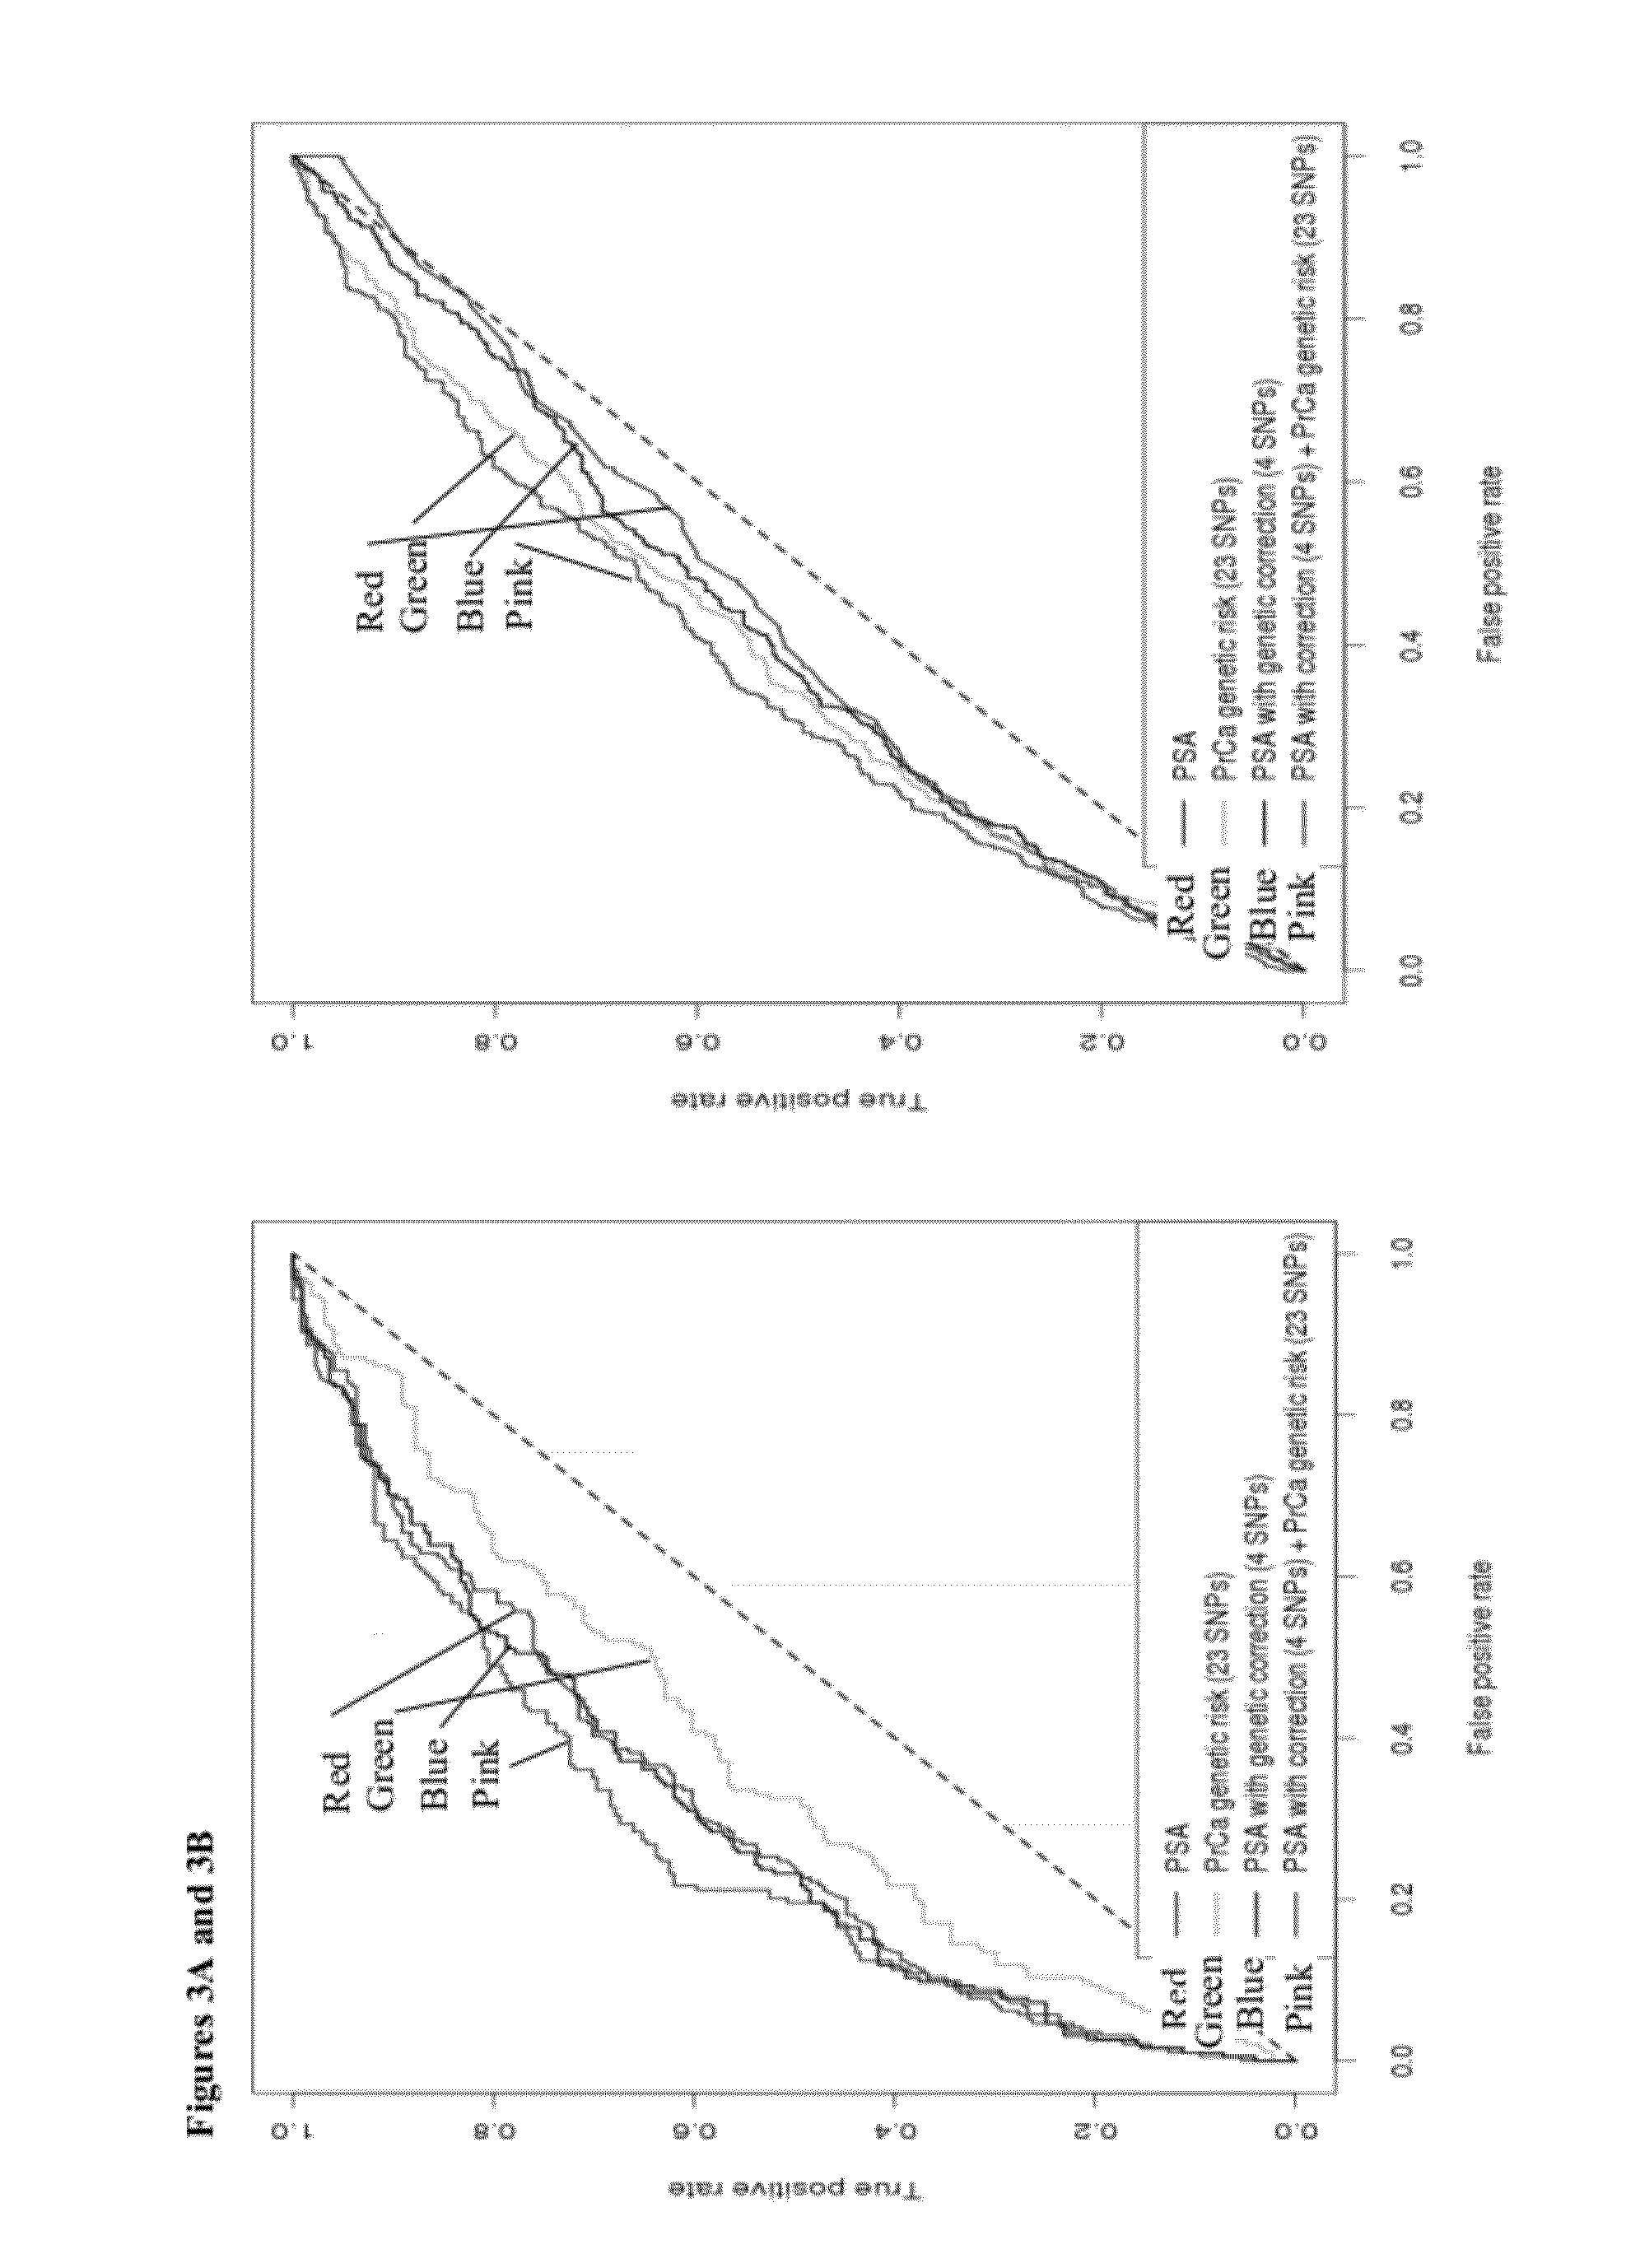 Sequence Variants Associated with Prostate Specific Antigen Levels